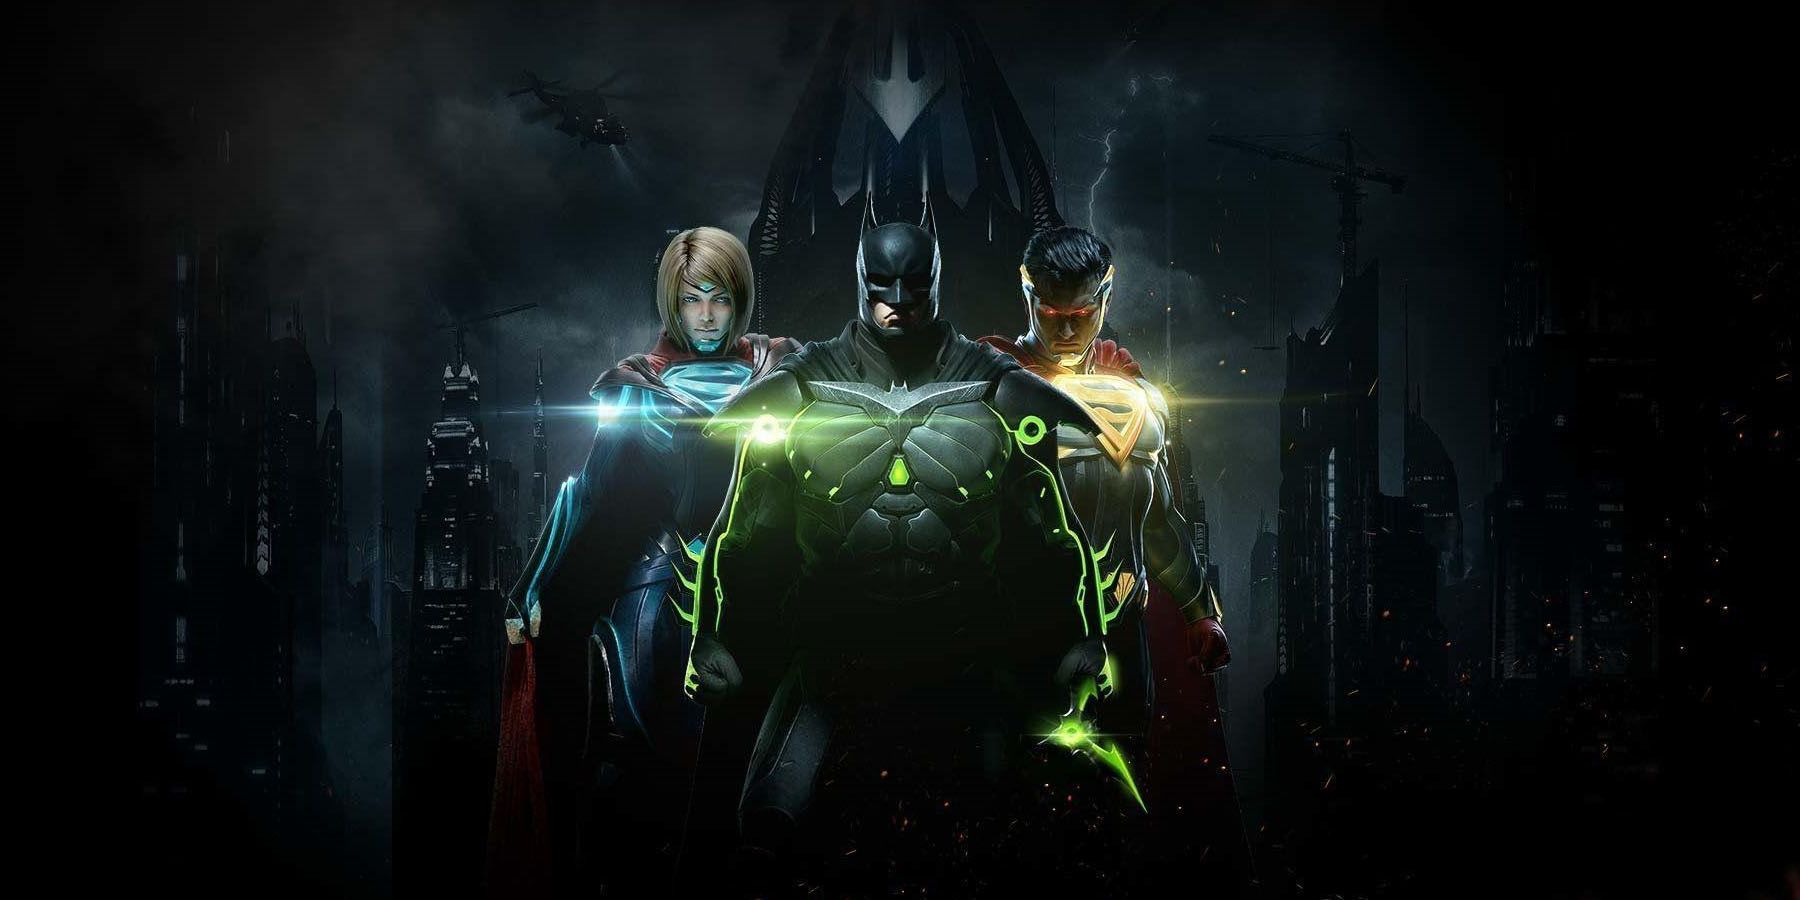 Injustice 2: How to Unlock All Characters